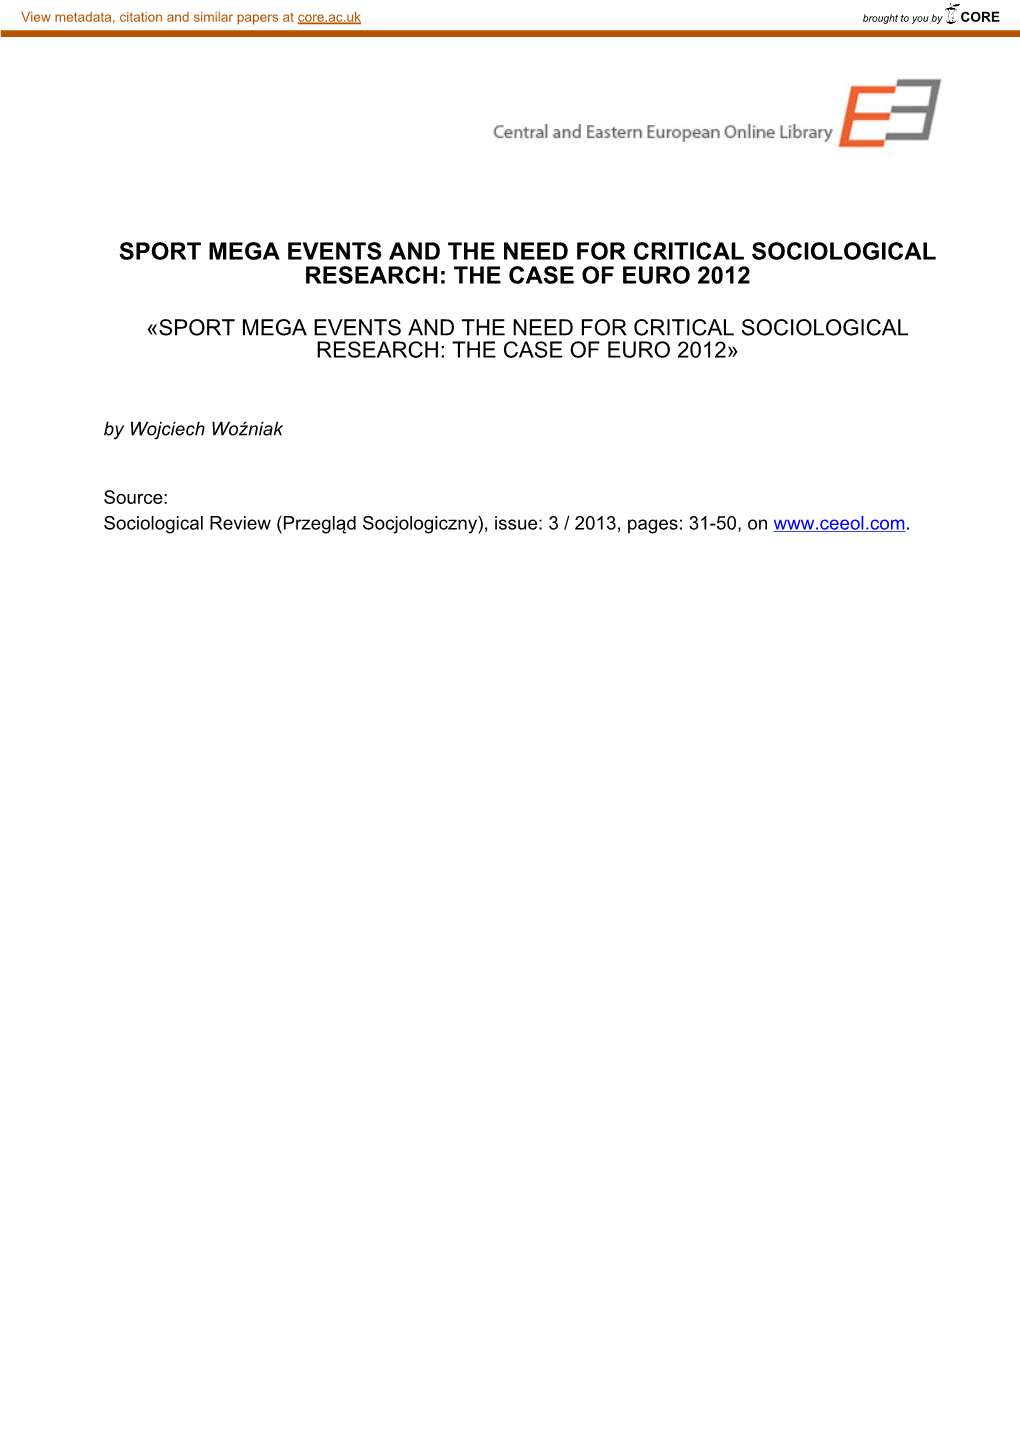 Sport Mega Events and the Need for Critical Sociological Research: the Case of Euro 2012